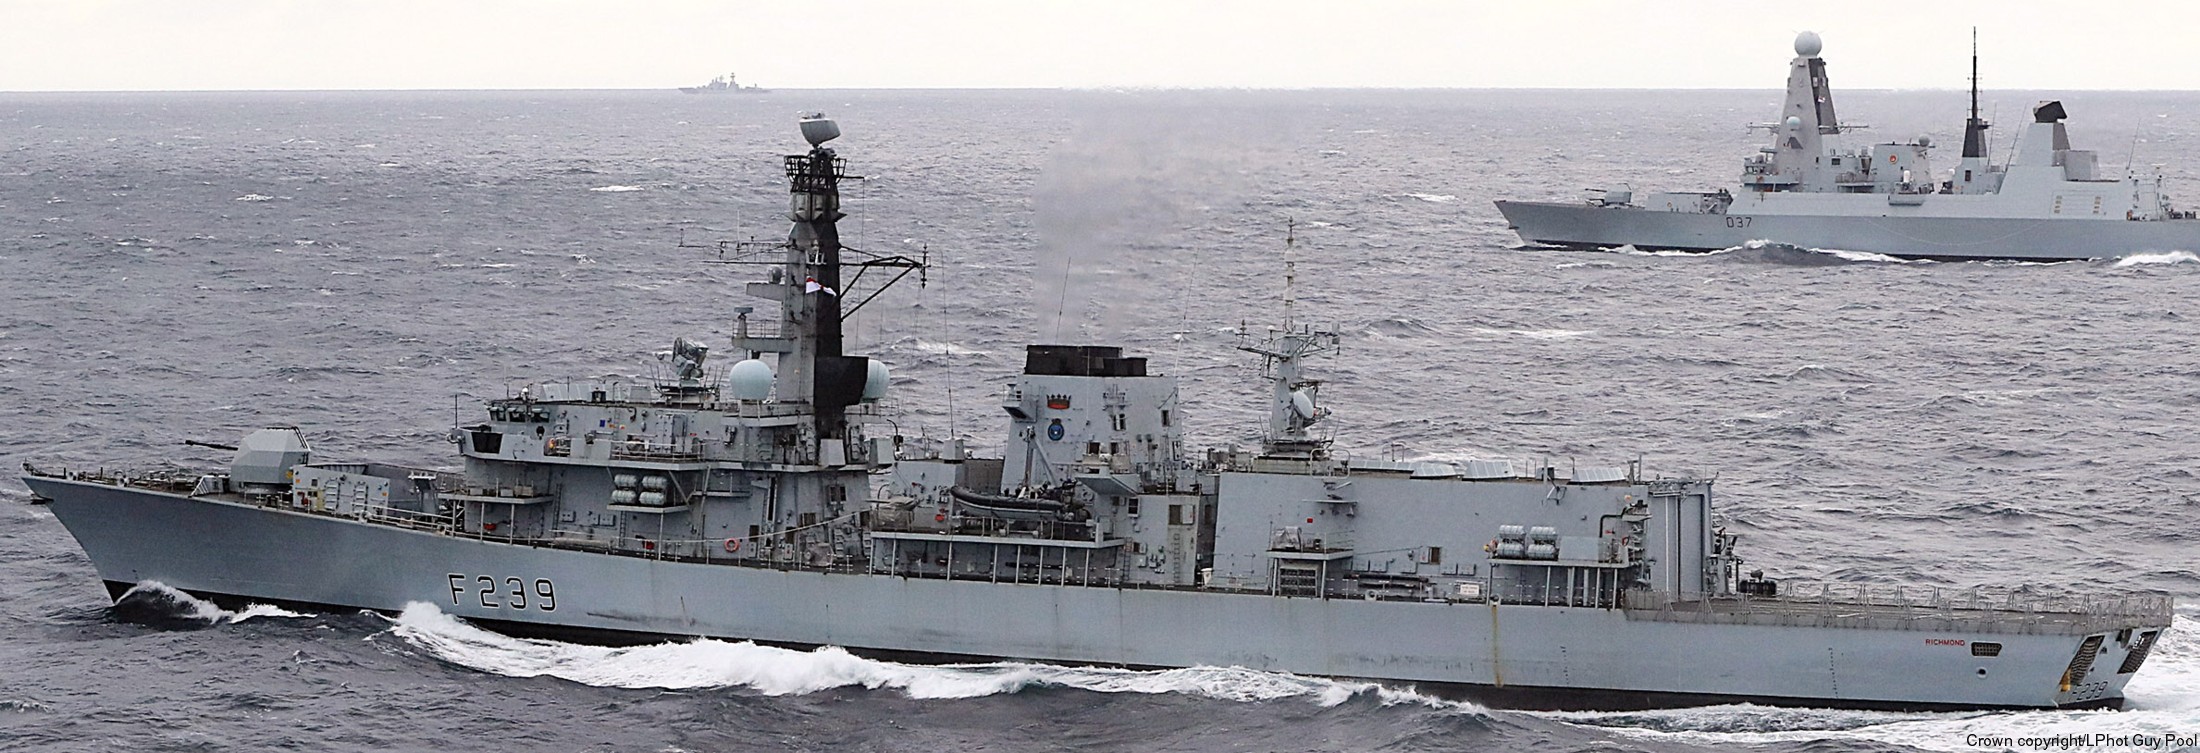 f-239 hms richmond type 23 duke class guided missile frigate ffg royal navy 22